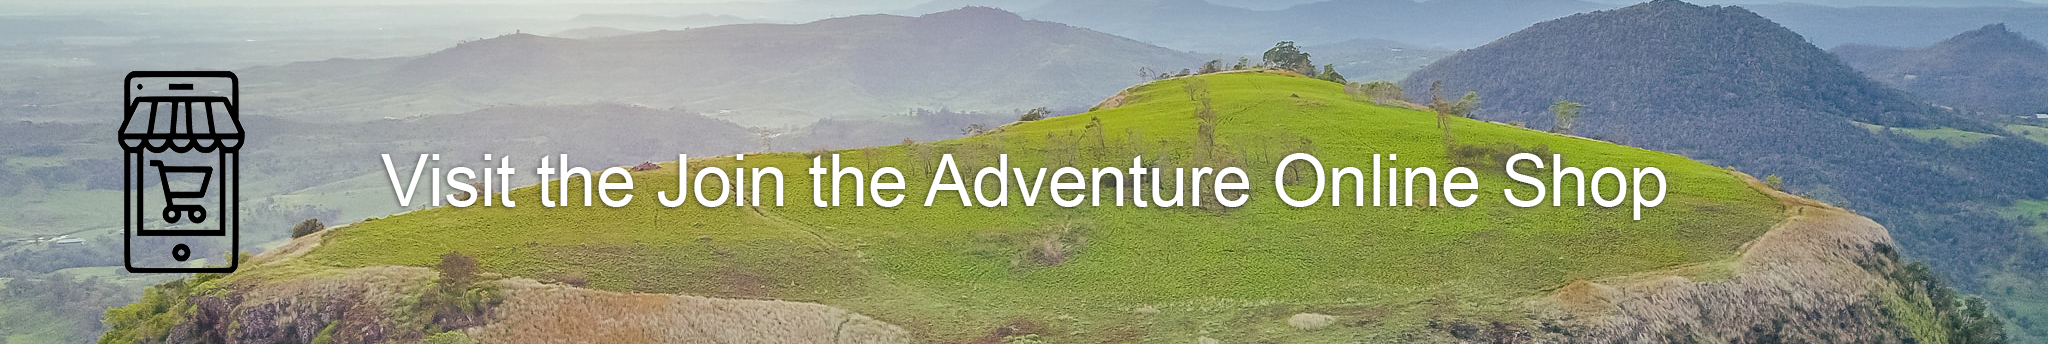 Join the Adventure online shop.